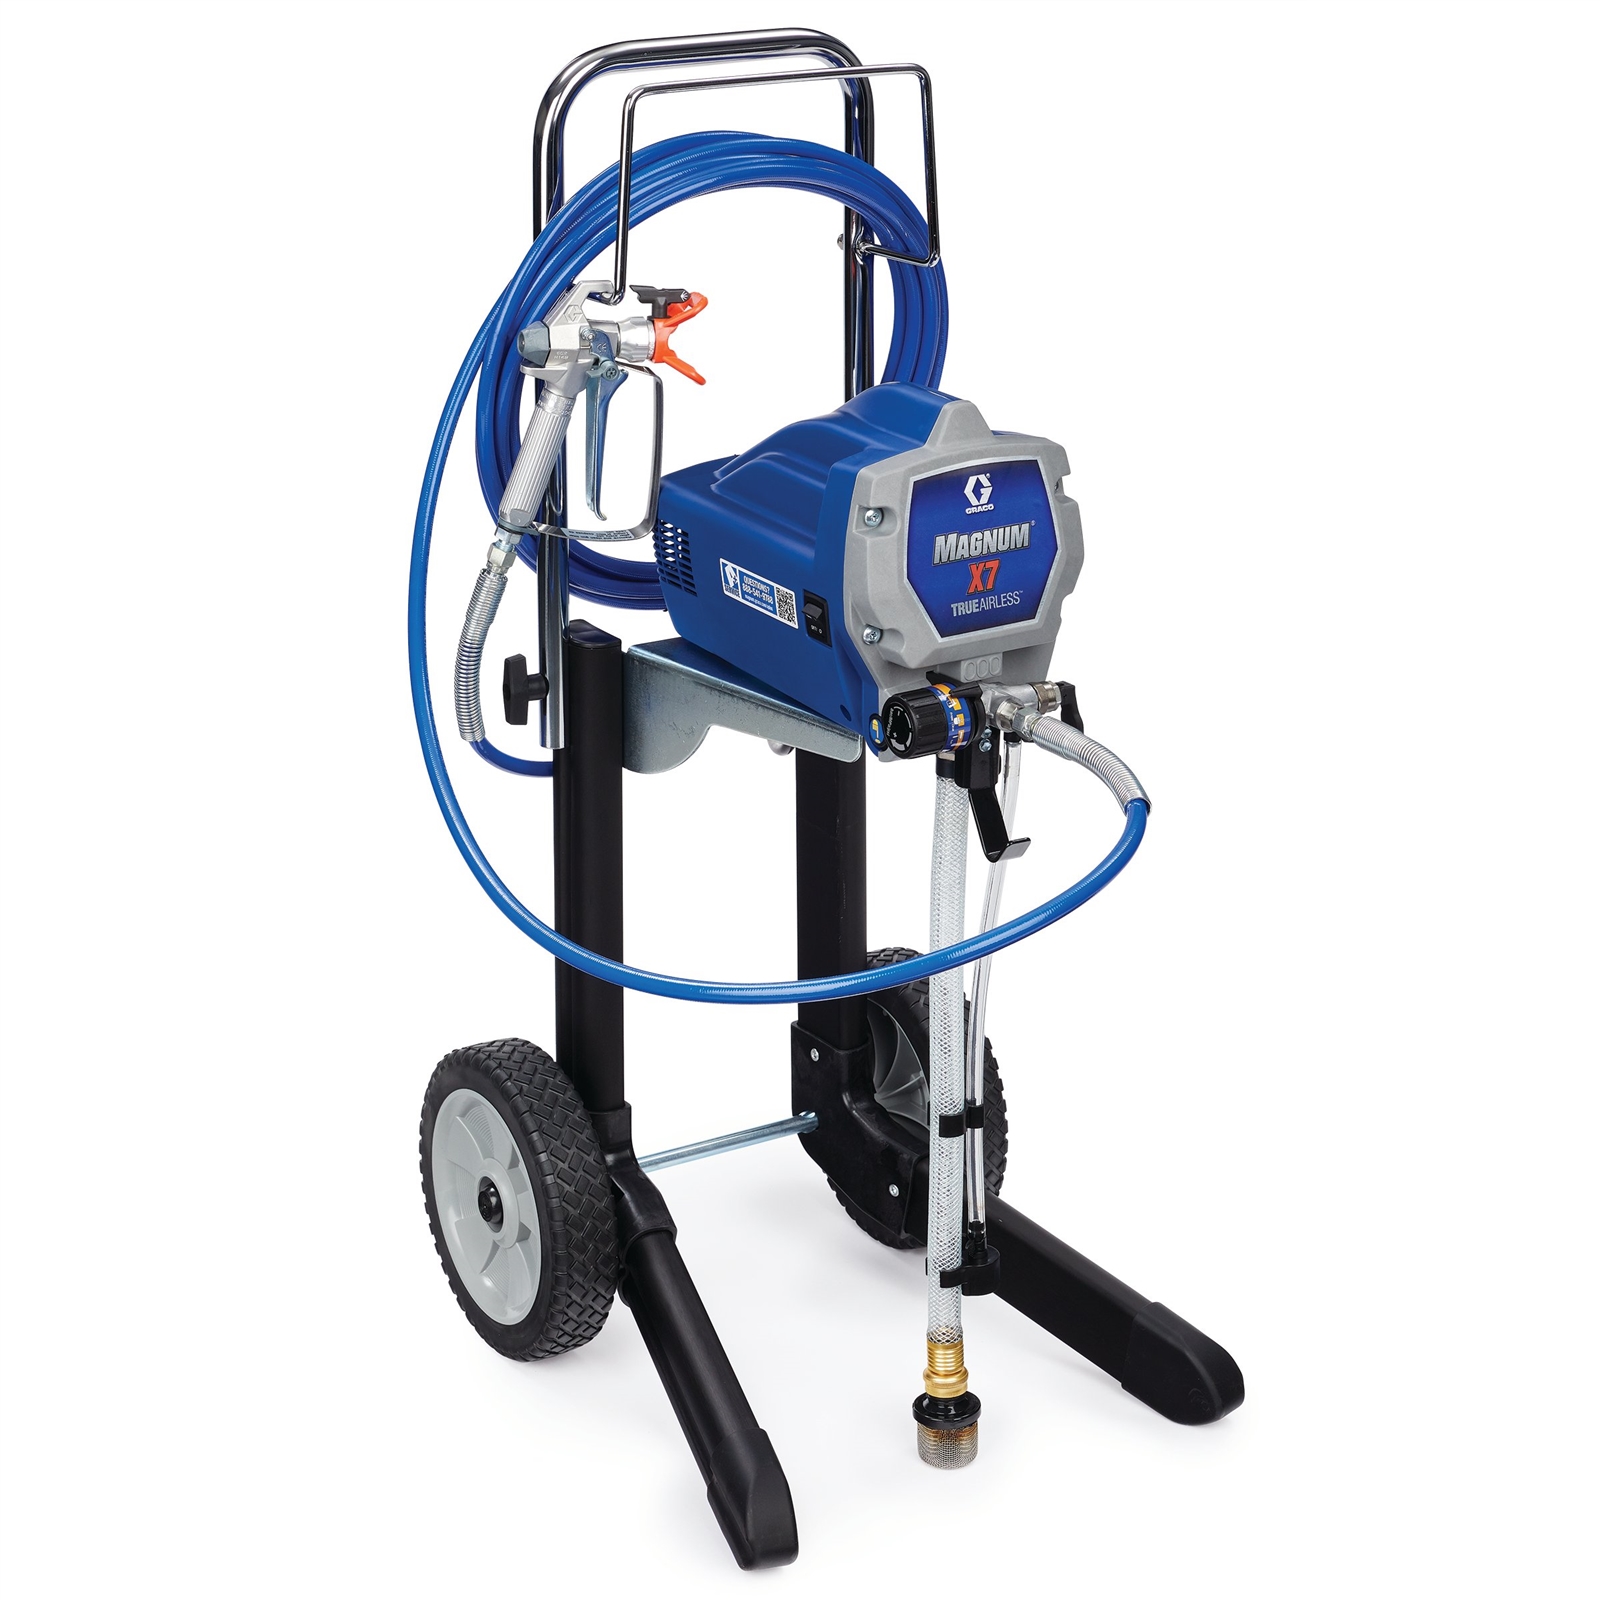 Graco Magnum 25 ft. x 1/4 in. Airless Hose Paint Sprayer Accessories Work  Tool